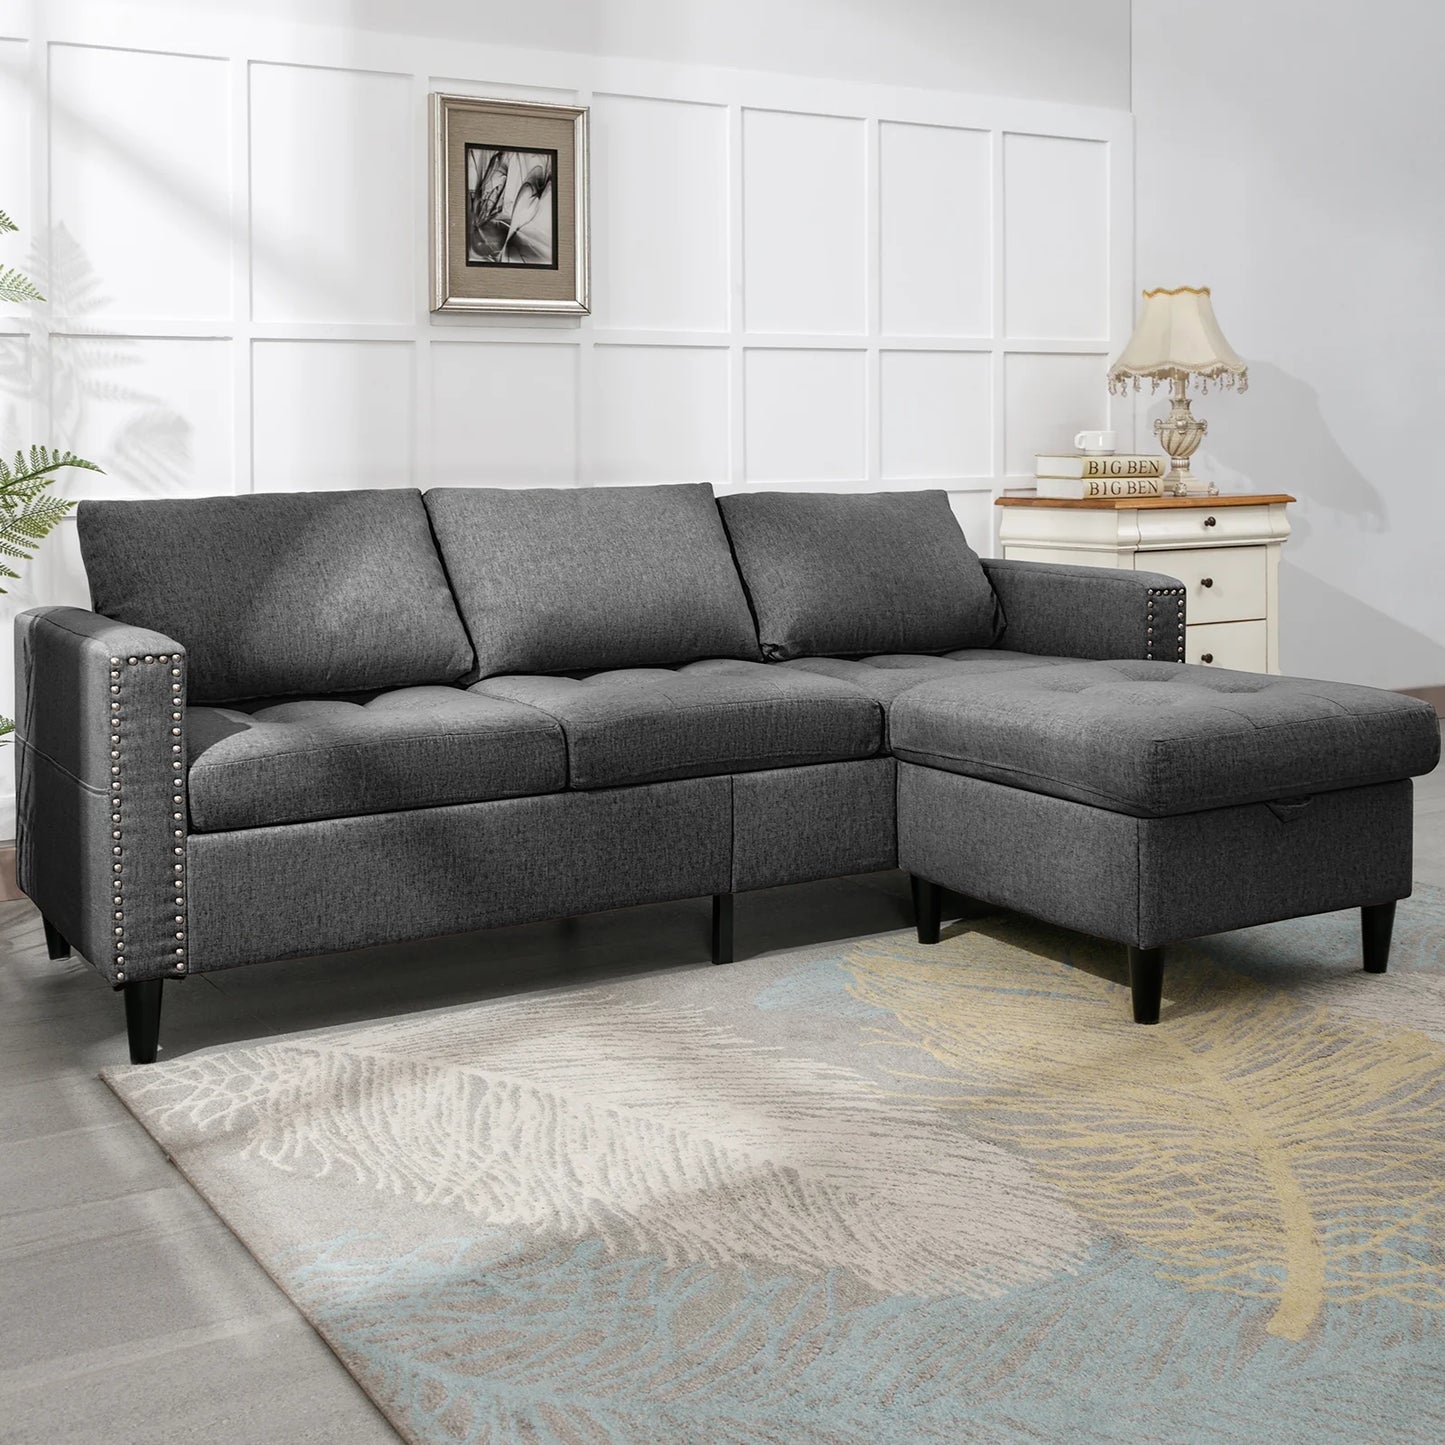 BALUS Sectional Sofa, L Shaped Modular Sectional Sofa with Flexible Storage Ottoman Chaise, Modern Sofa Couches, Living Room Furniture Set, Small Place Couch - Dark Grey